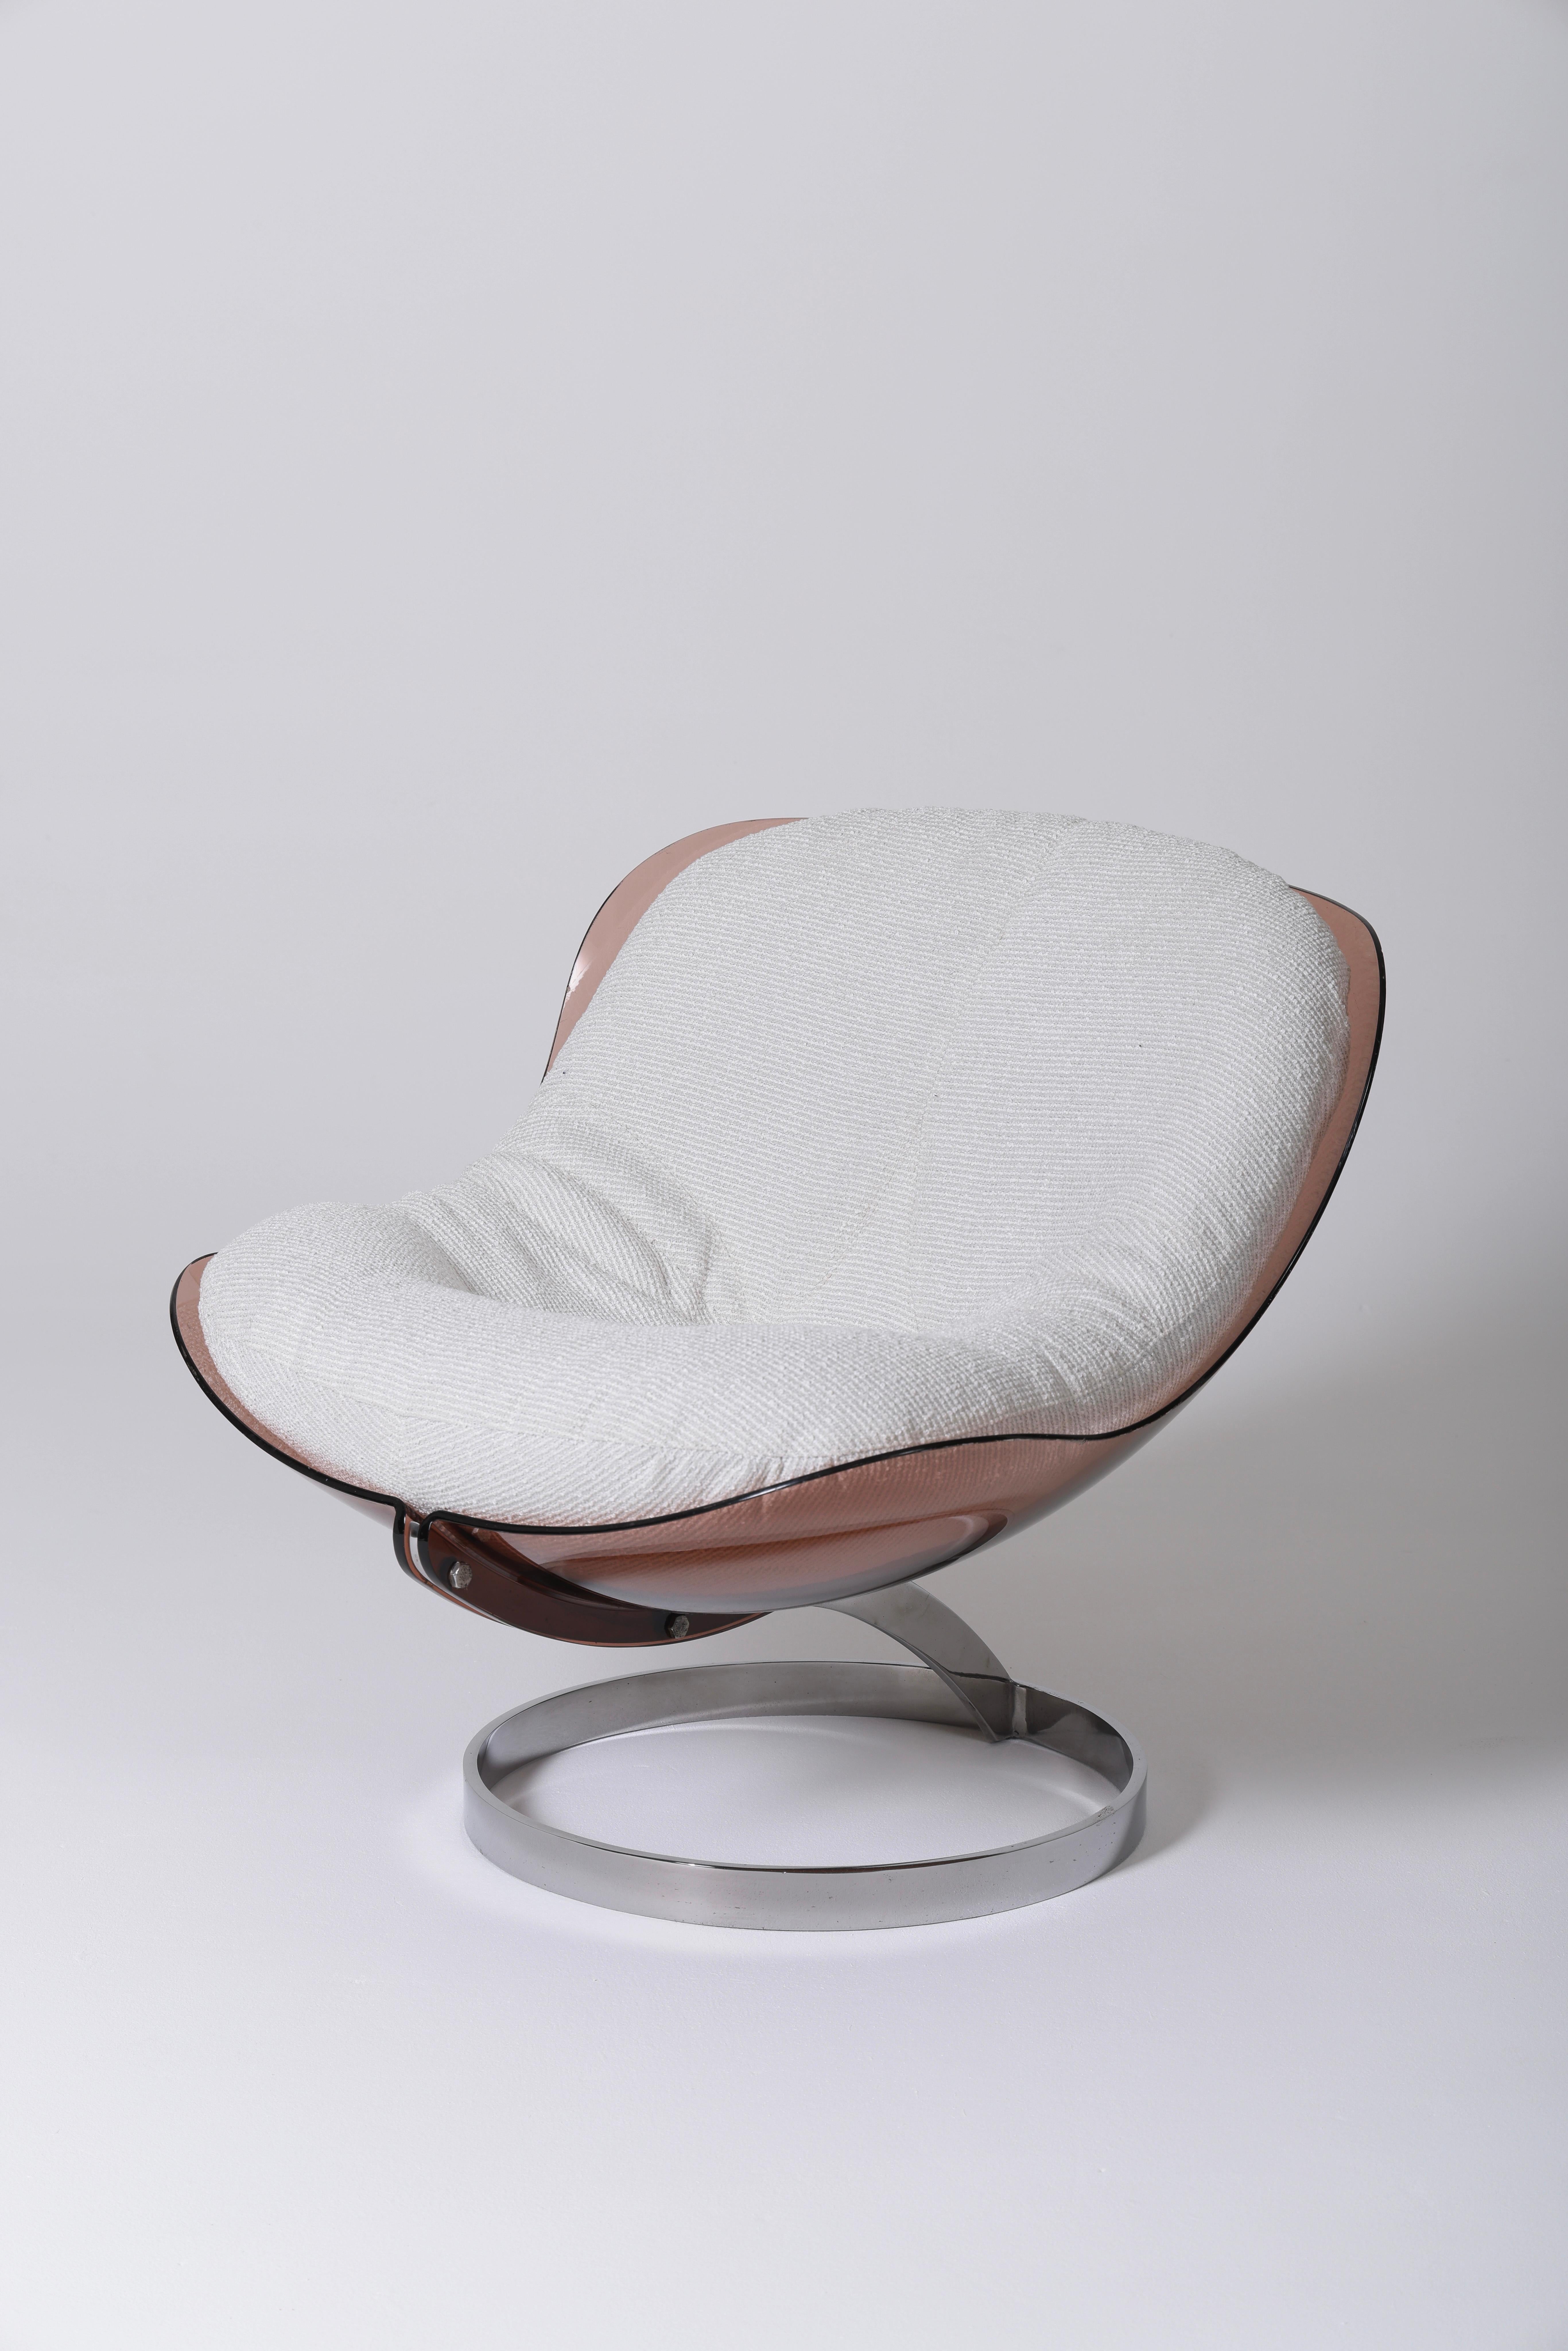 Sphere armchair by Boris Tabacoff, 70s. Structure in chromed metal and plexiglass, cushion in white fabric. Very good condition.